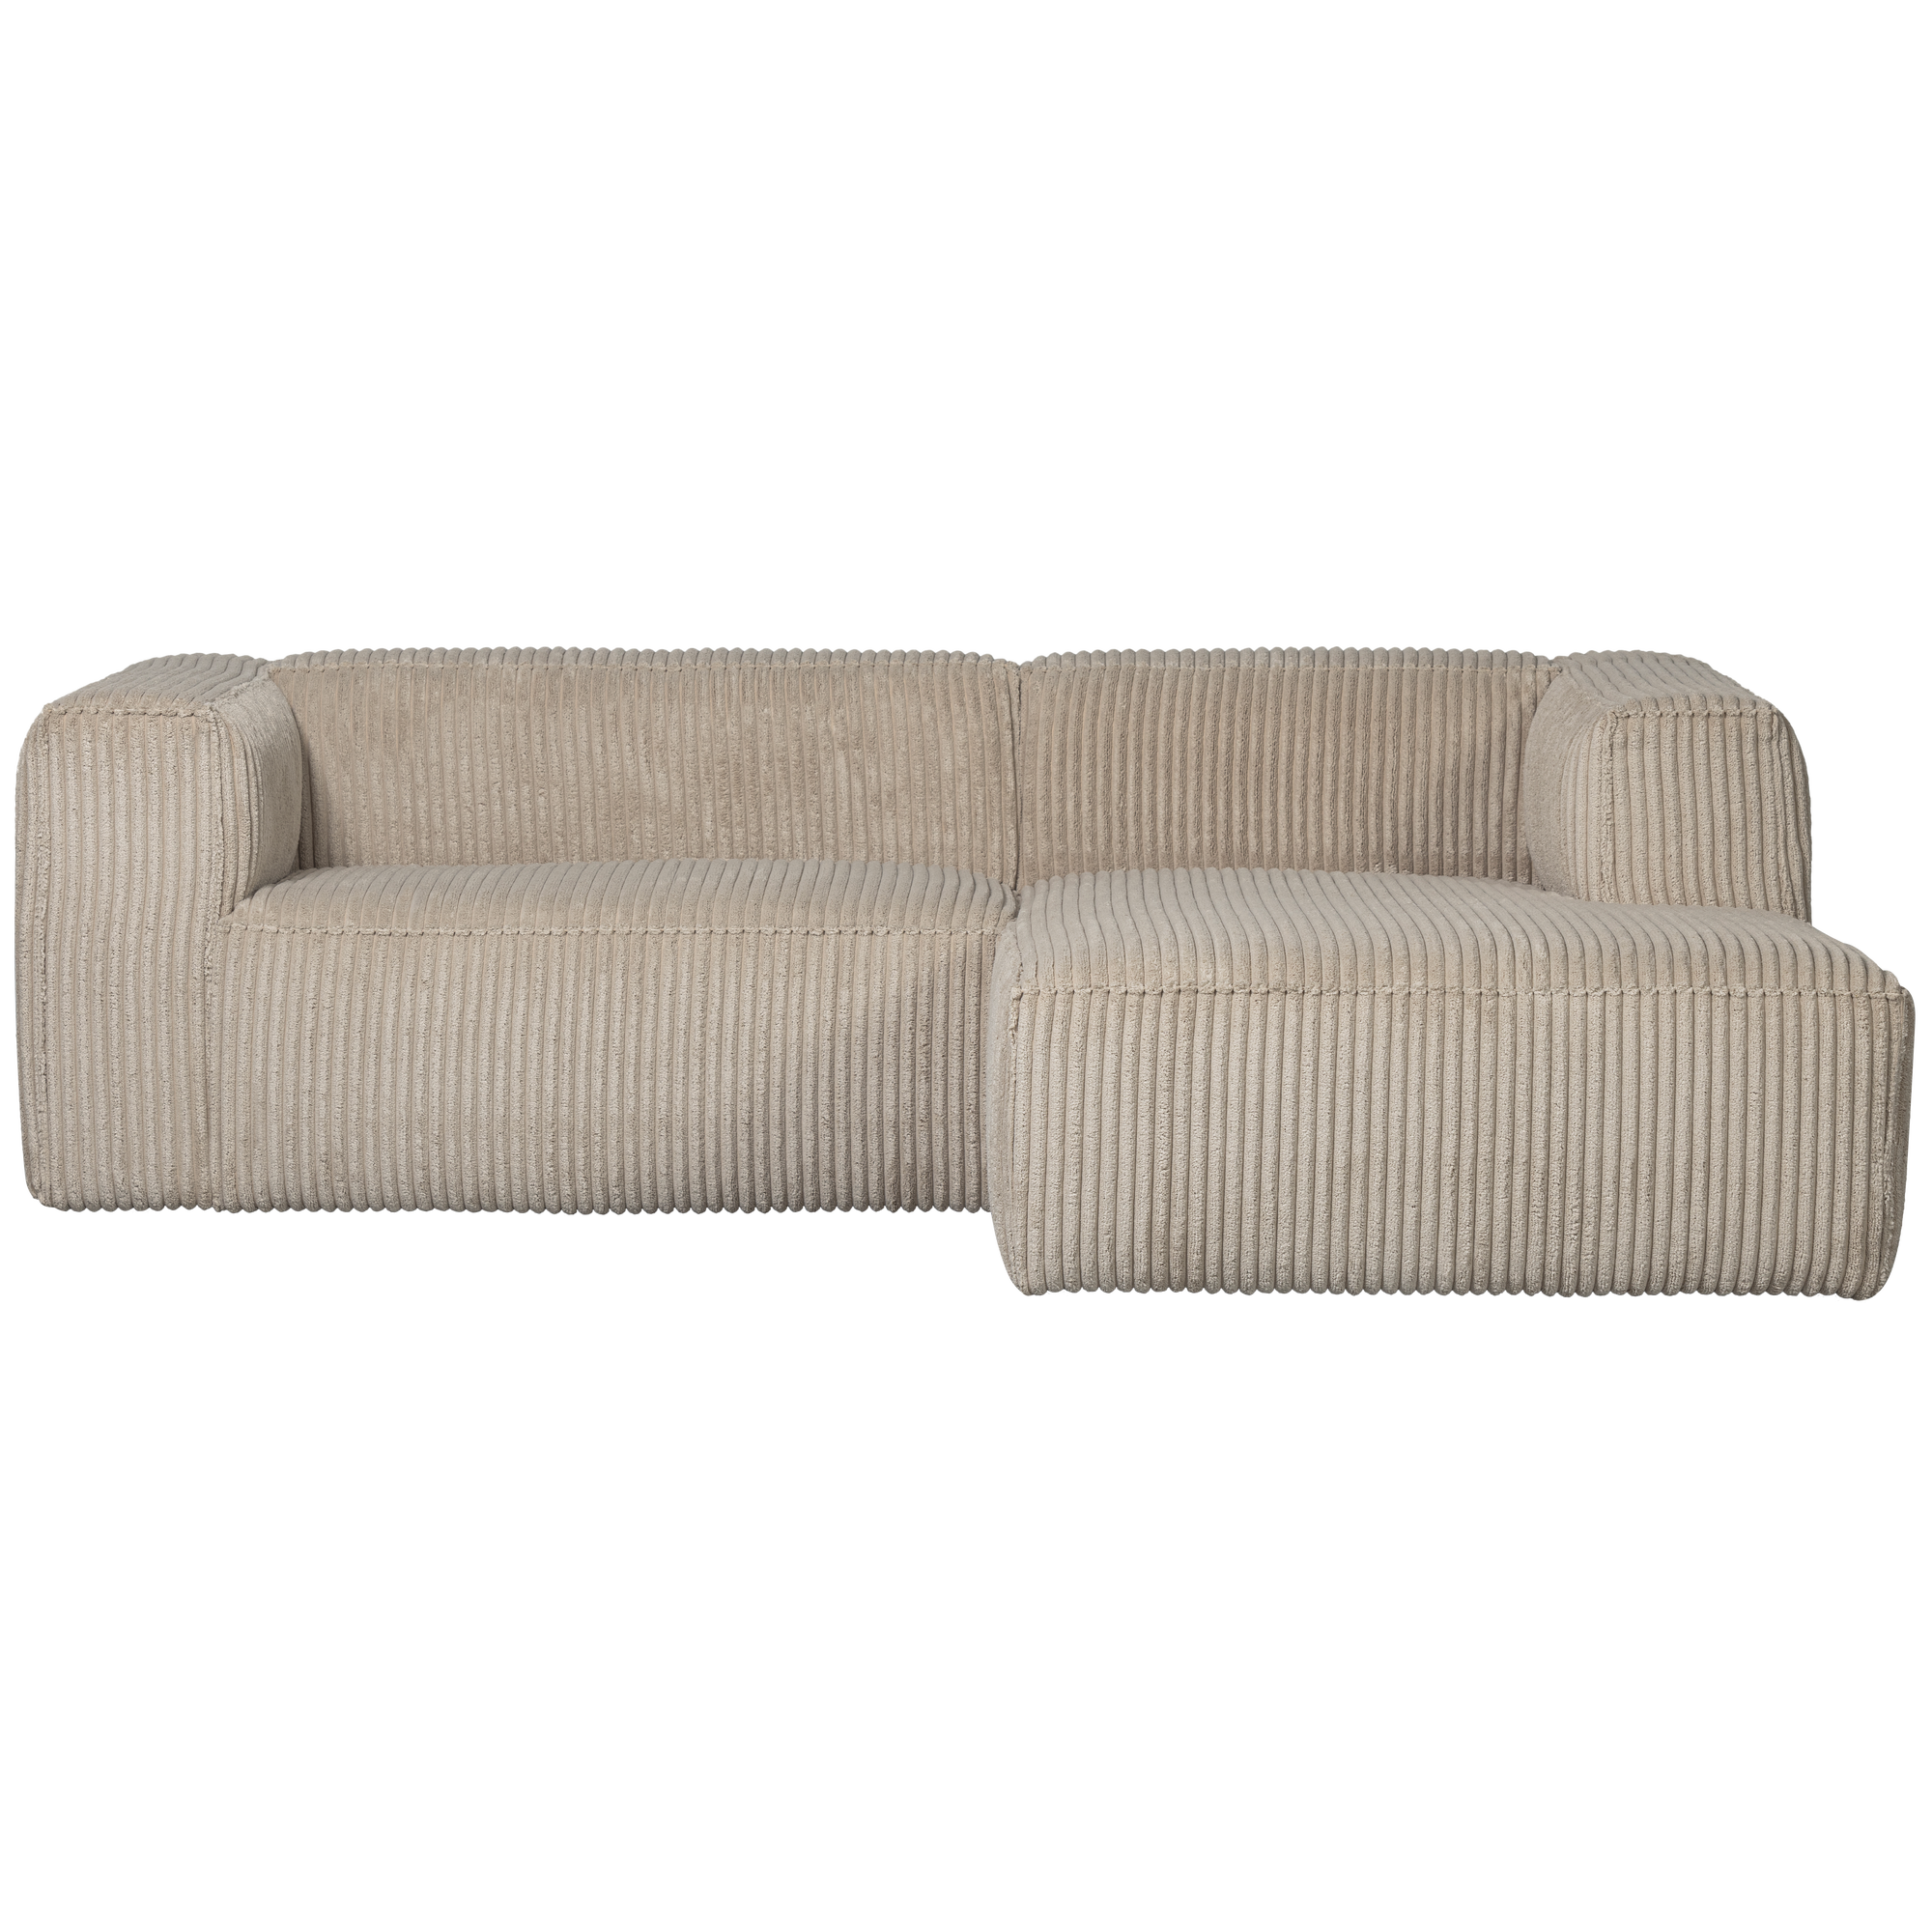 377433-RR-01_VS_WE_Bean_chaise_longue_links_grove_ribstof_travertin.png?auto=webp&format=png&width=2000&height=2000